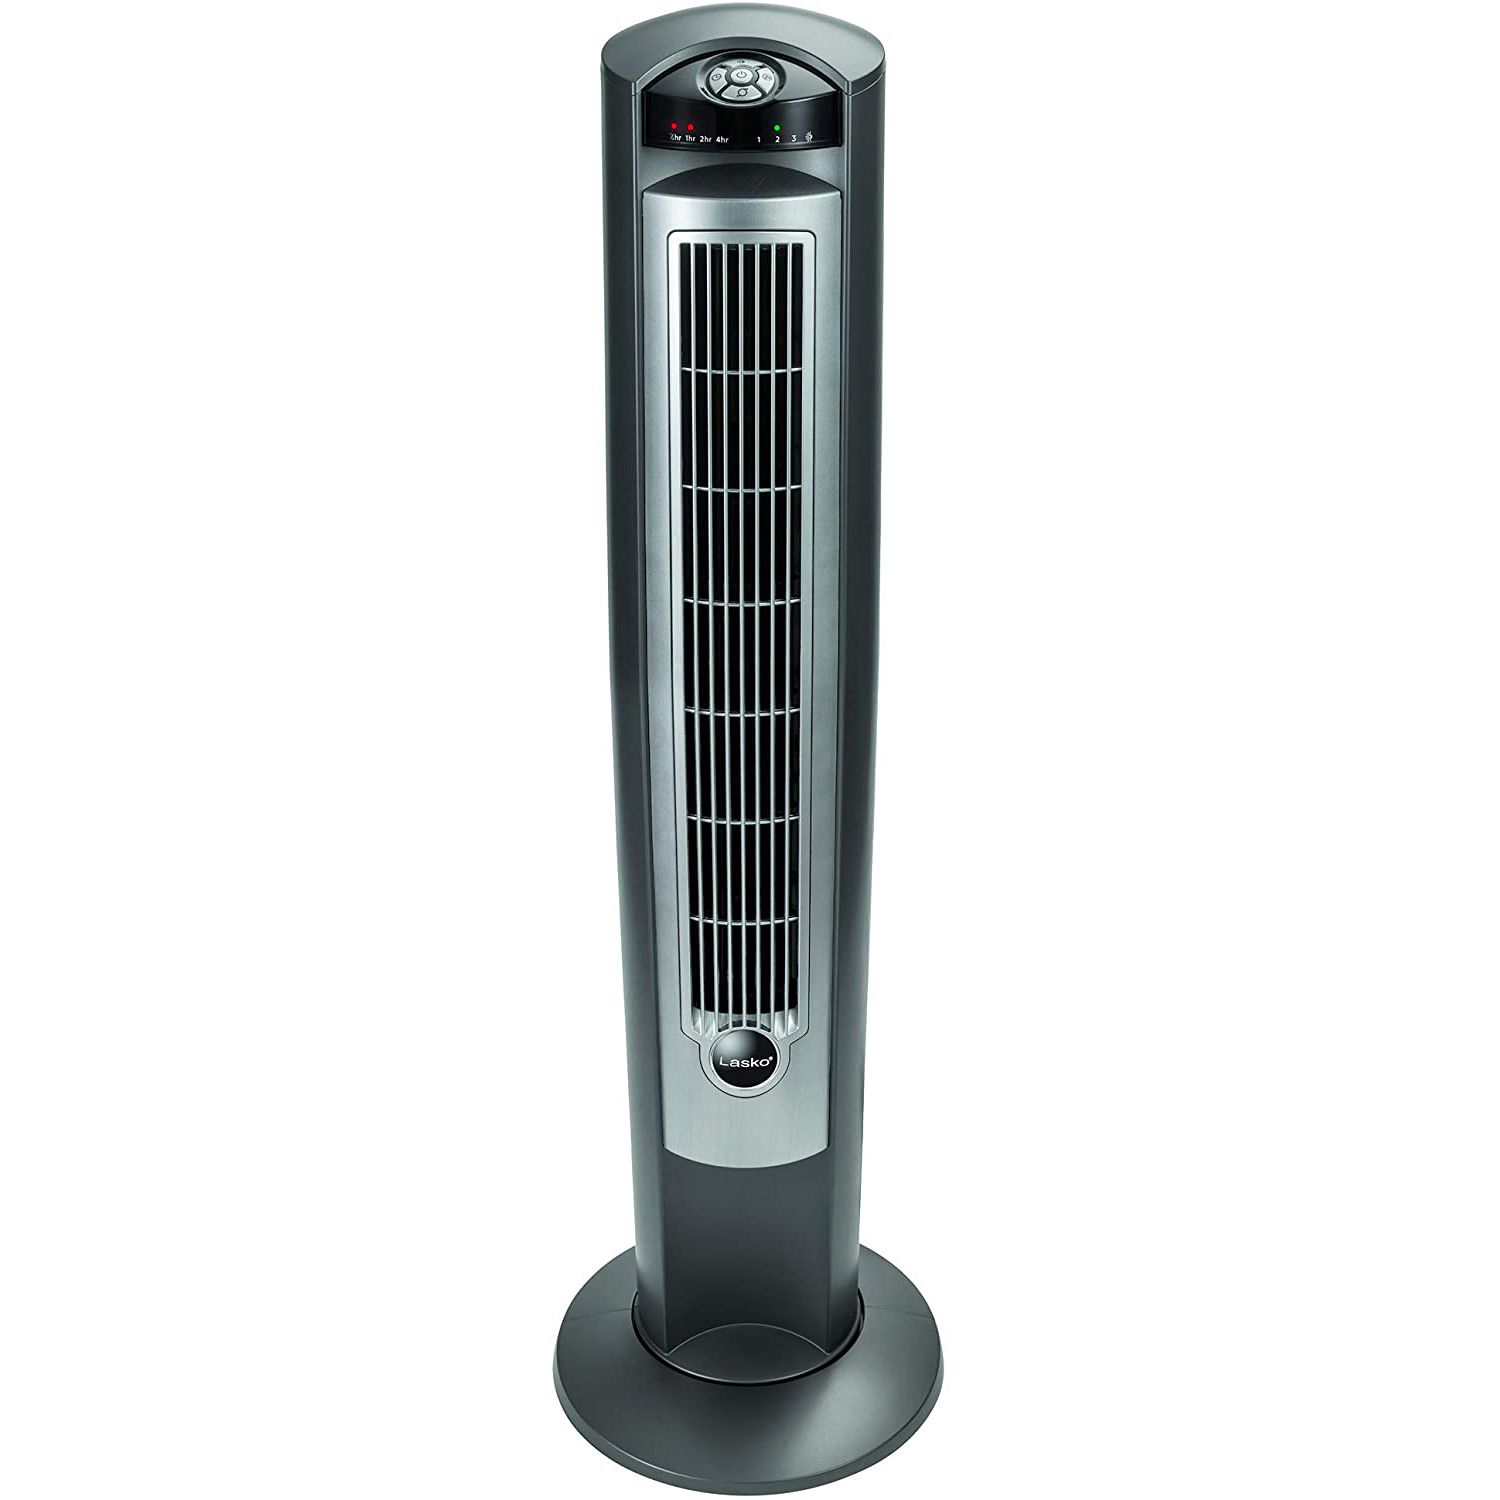 3 Modes 3 Speeds Built in 12 H Timer Compact Standing Fan for Bedroom and Home Office Use Remote Control Black, 35inch Kismile Portable Quiet Tower Fan with LED Display